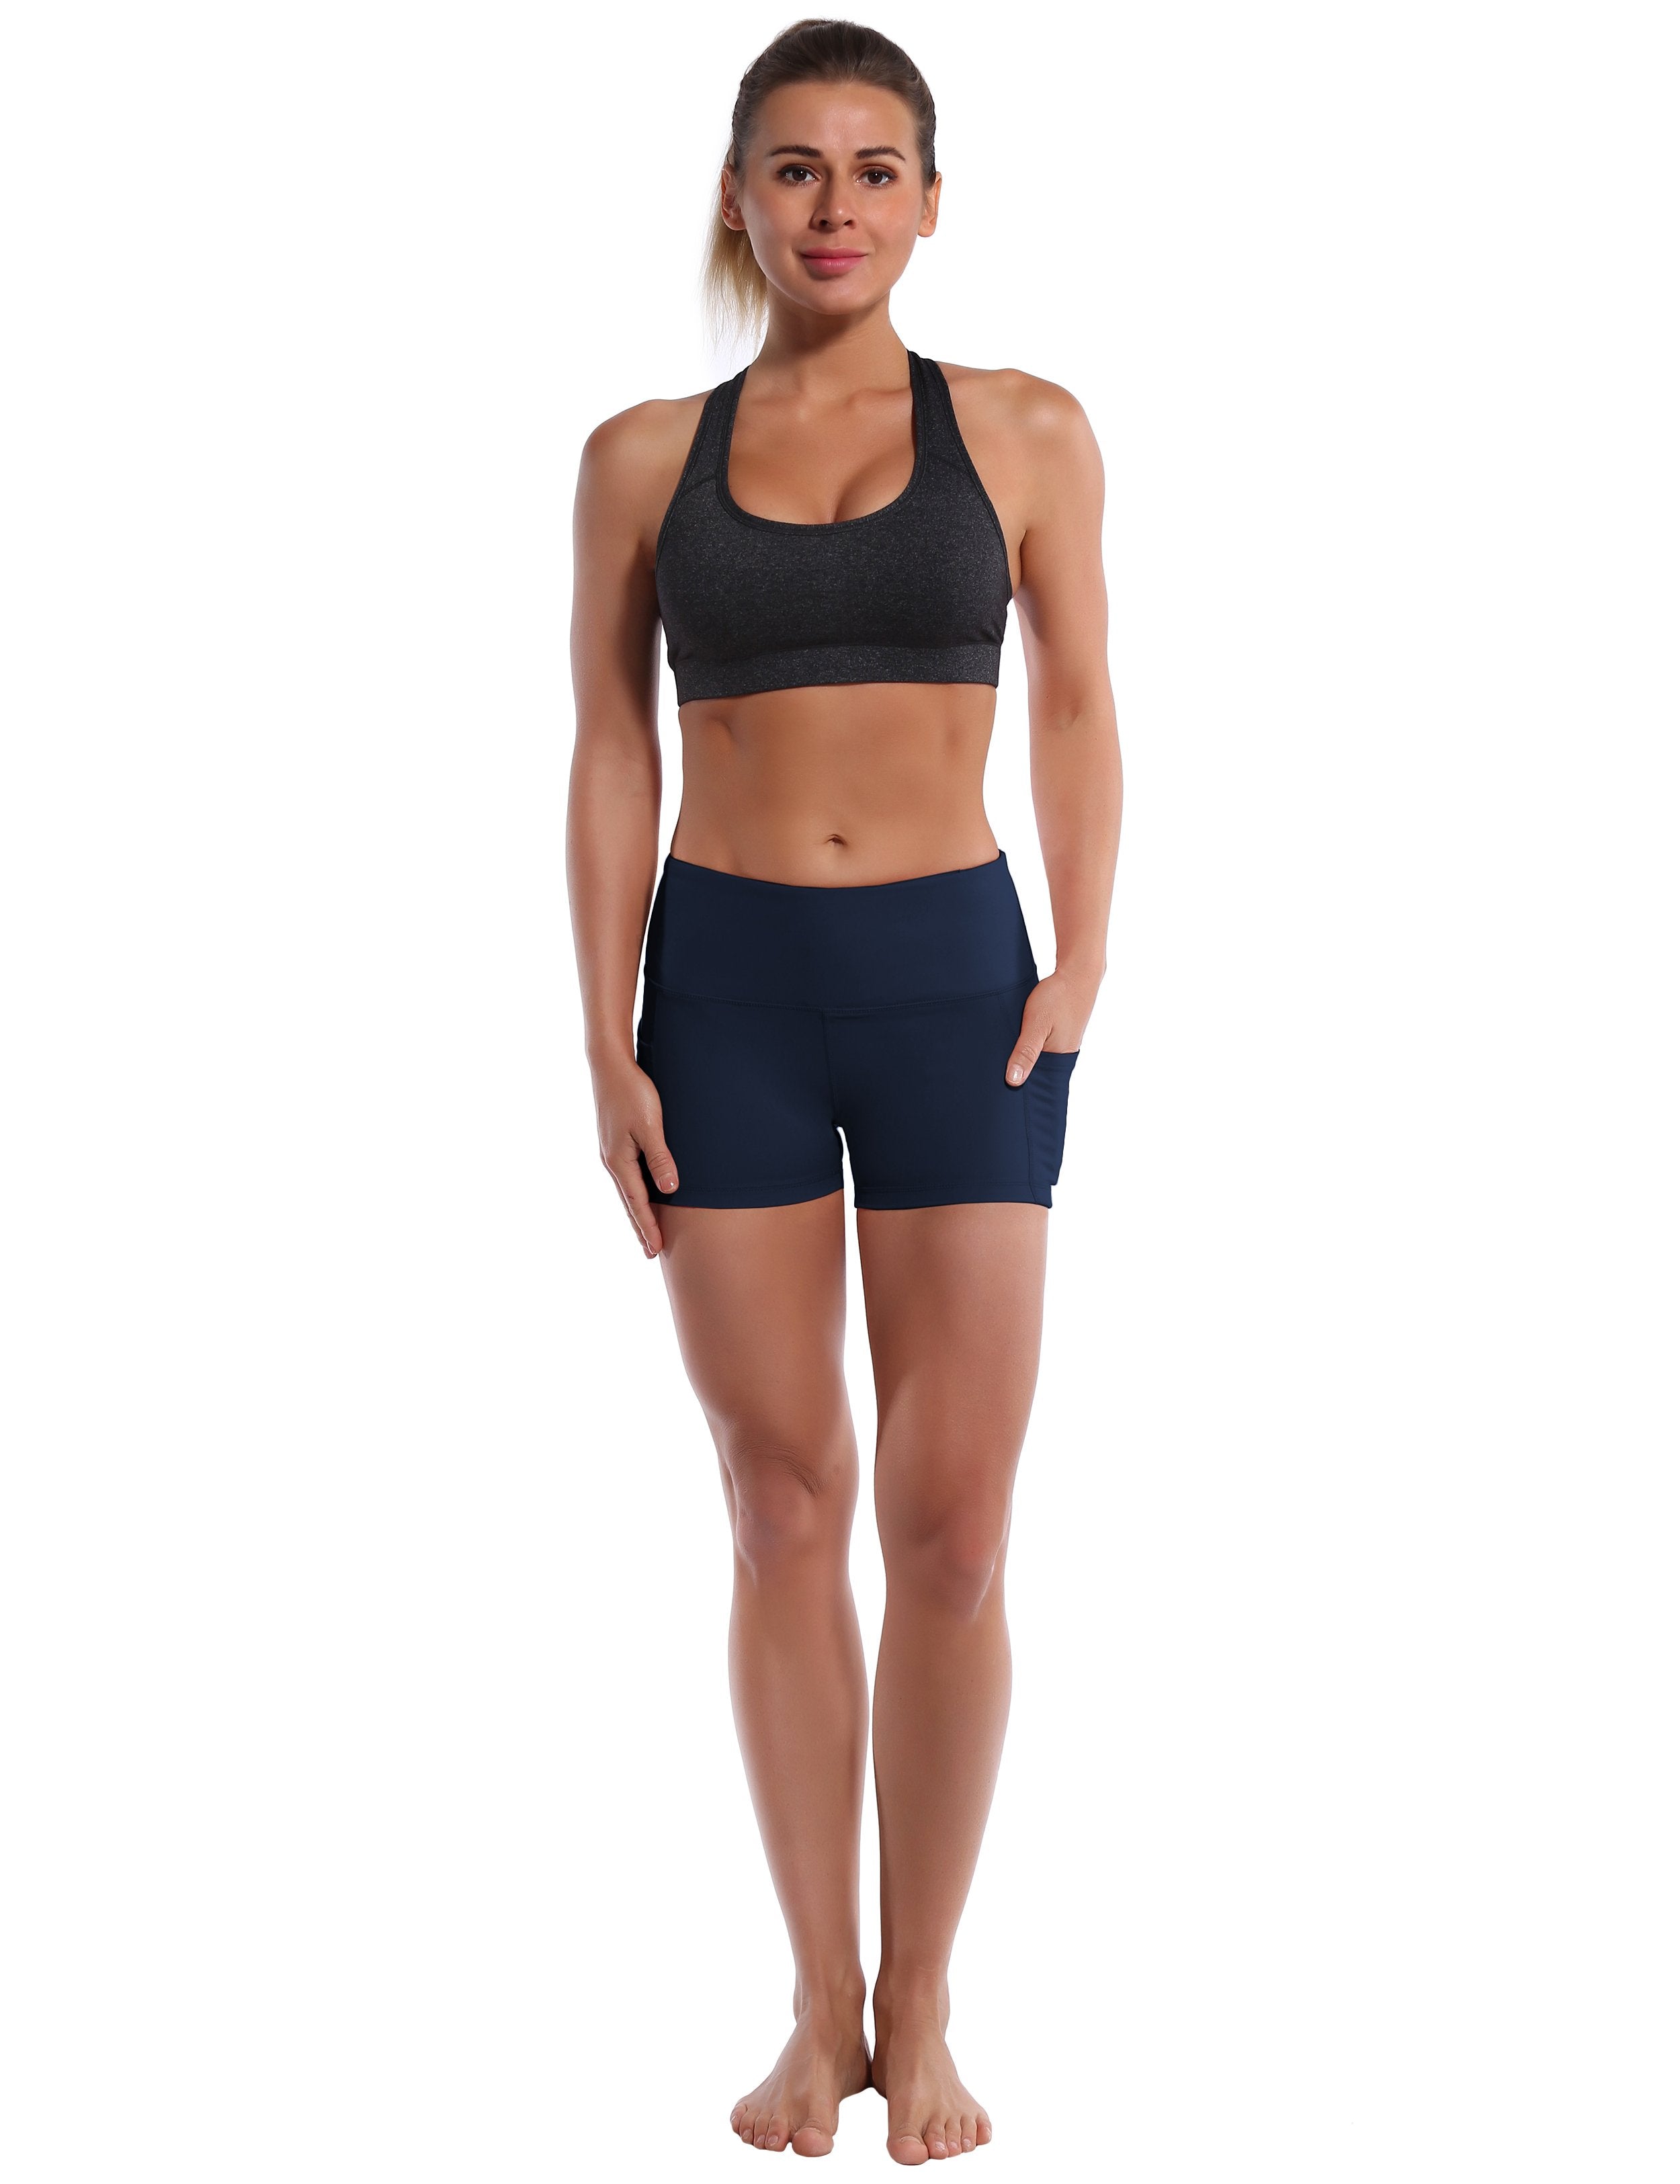 2.5" Side Pockets Running Shorts darknavy Sleek, soft, smooth and totally comfortable: our newest sexy style is here. Softest-ever fabric High elasticity High density 4-way stretch Fabric doesn't attract lint easily No see-through Moisture-wicking Machine wash 78% Polyester, 22% Spandex